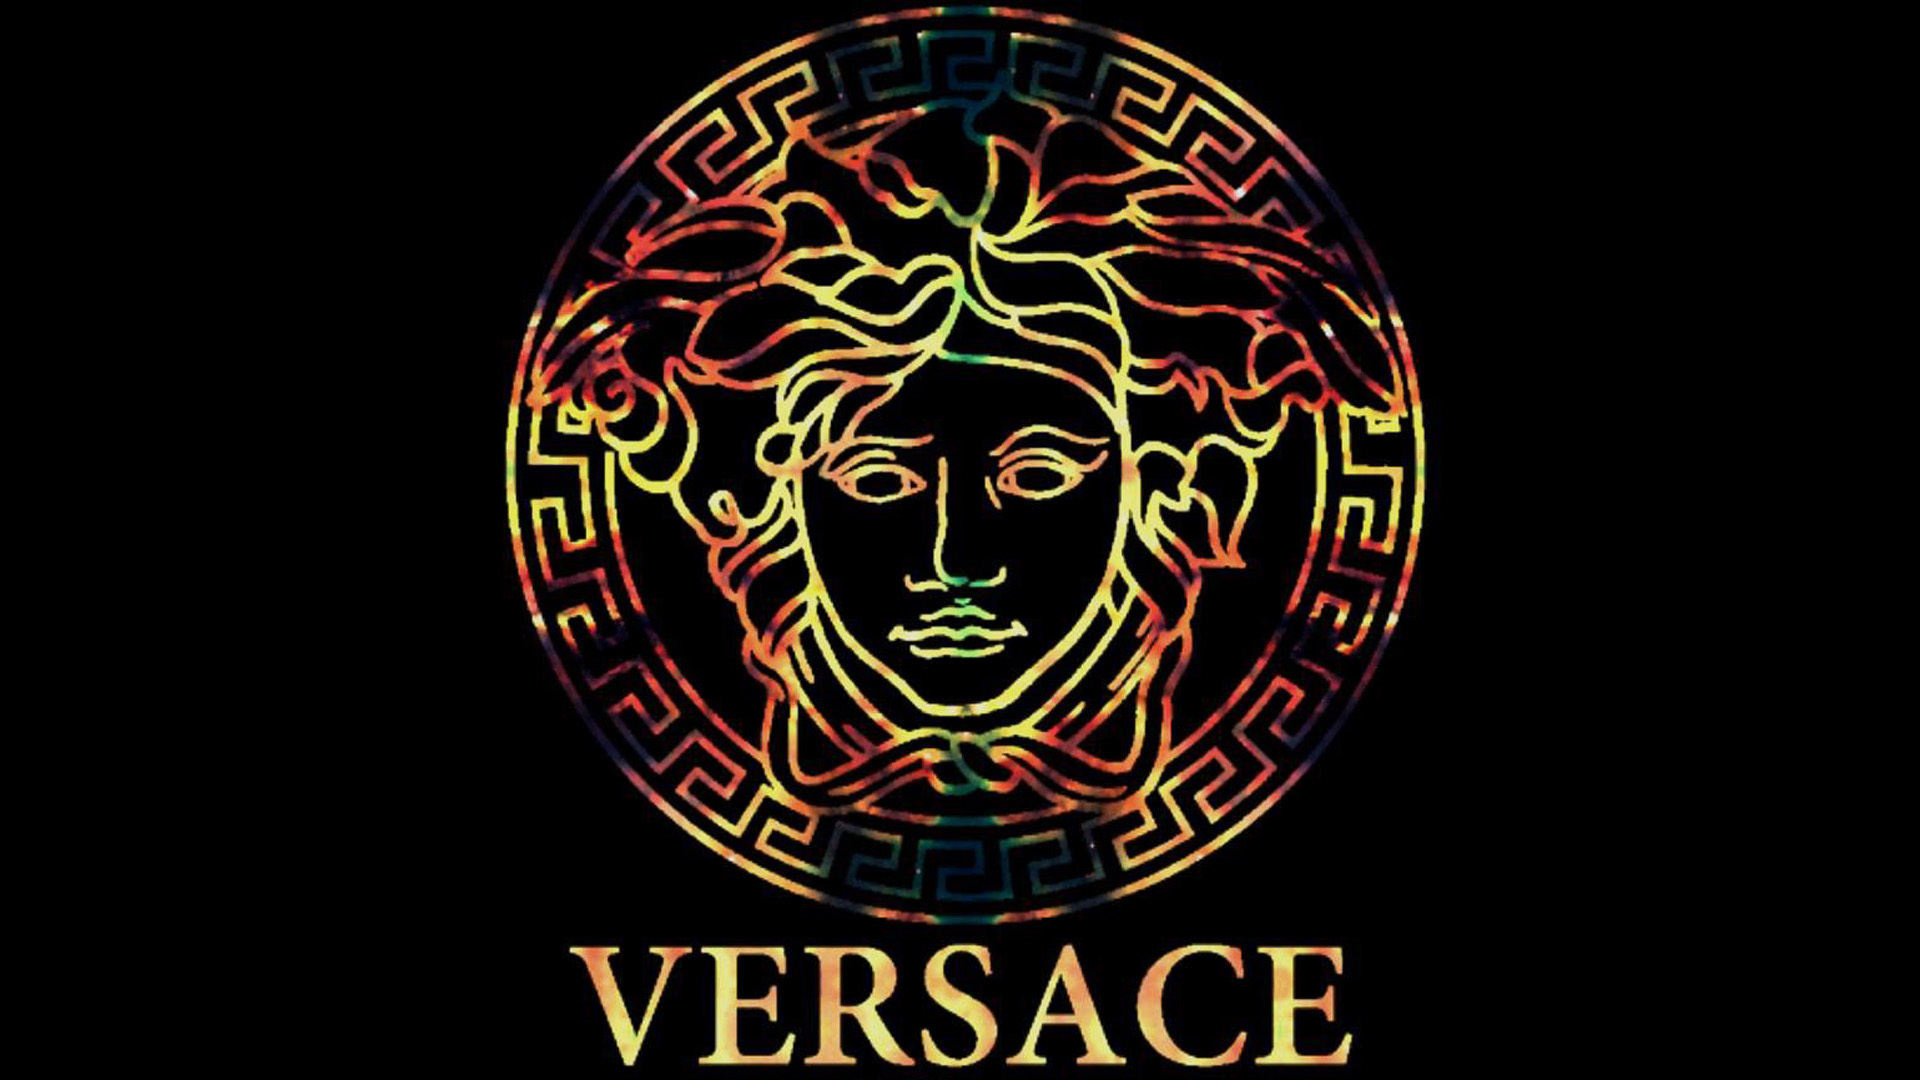 Versace Wallpapers Images Photos Pictures Backgrounds HD Wallpapers Download Free Images Wallpaper [wallpaper981.blogspot.com]